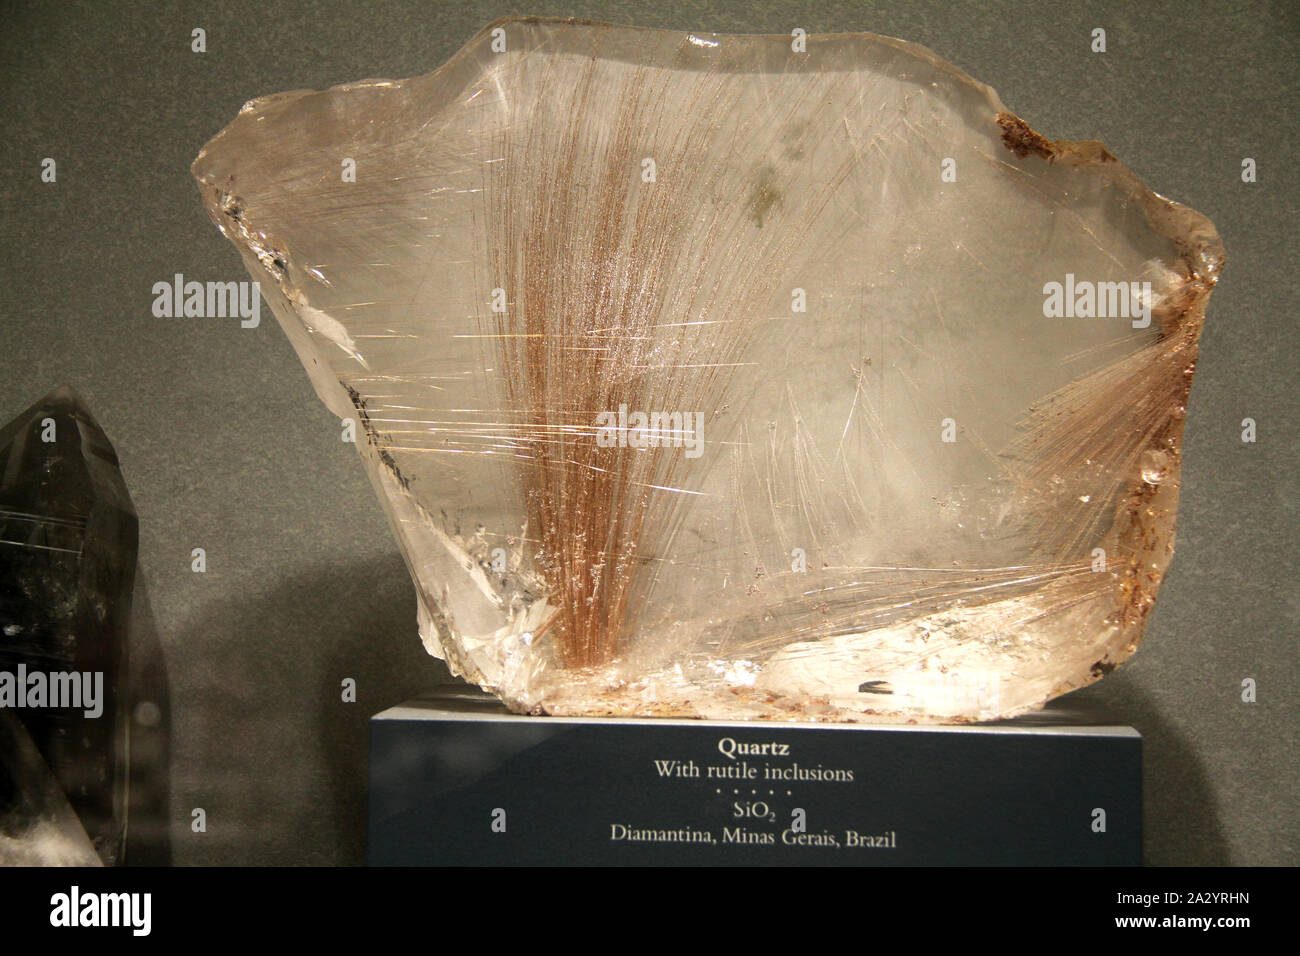 Quartz crystal displayed at The National Museum of Natural History in Washington DC, USA Stock Photo